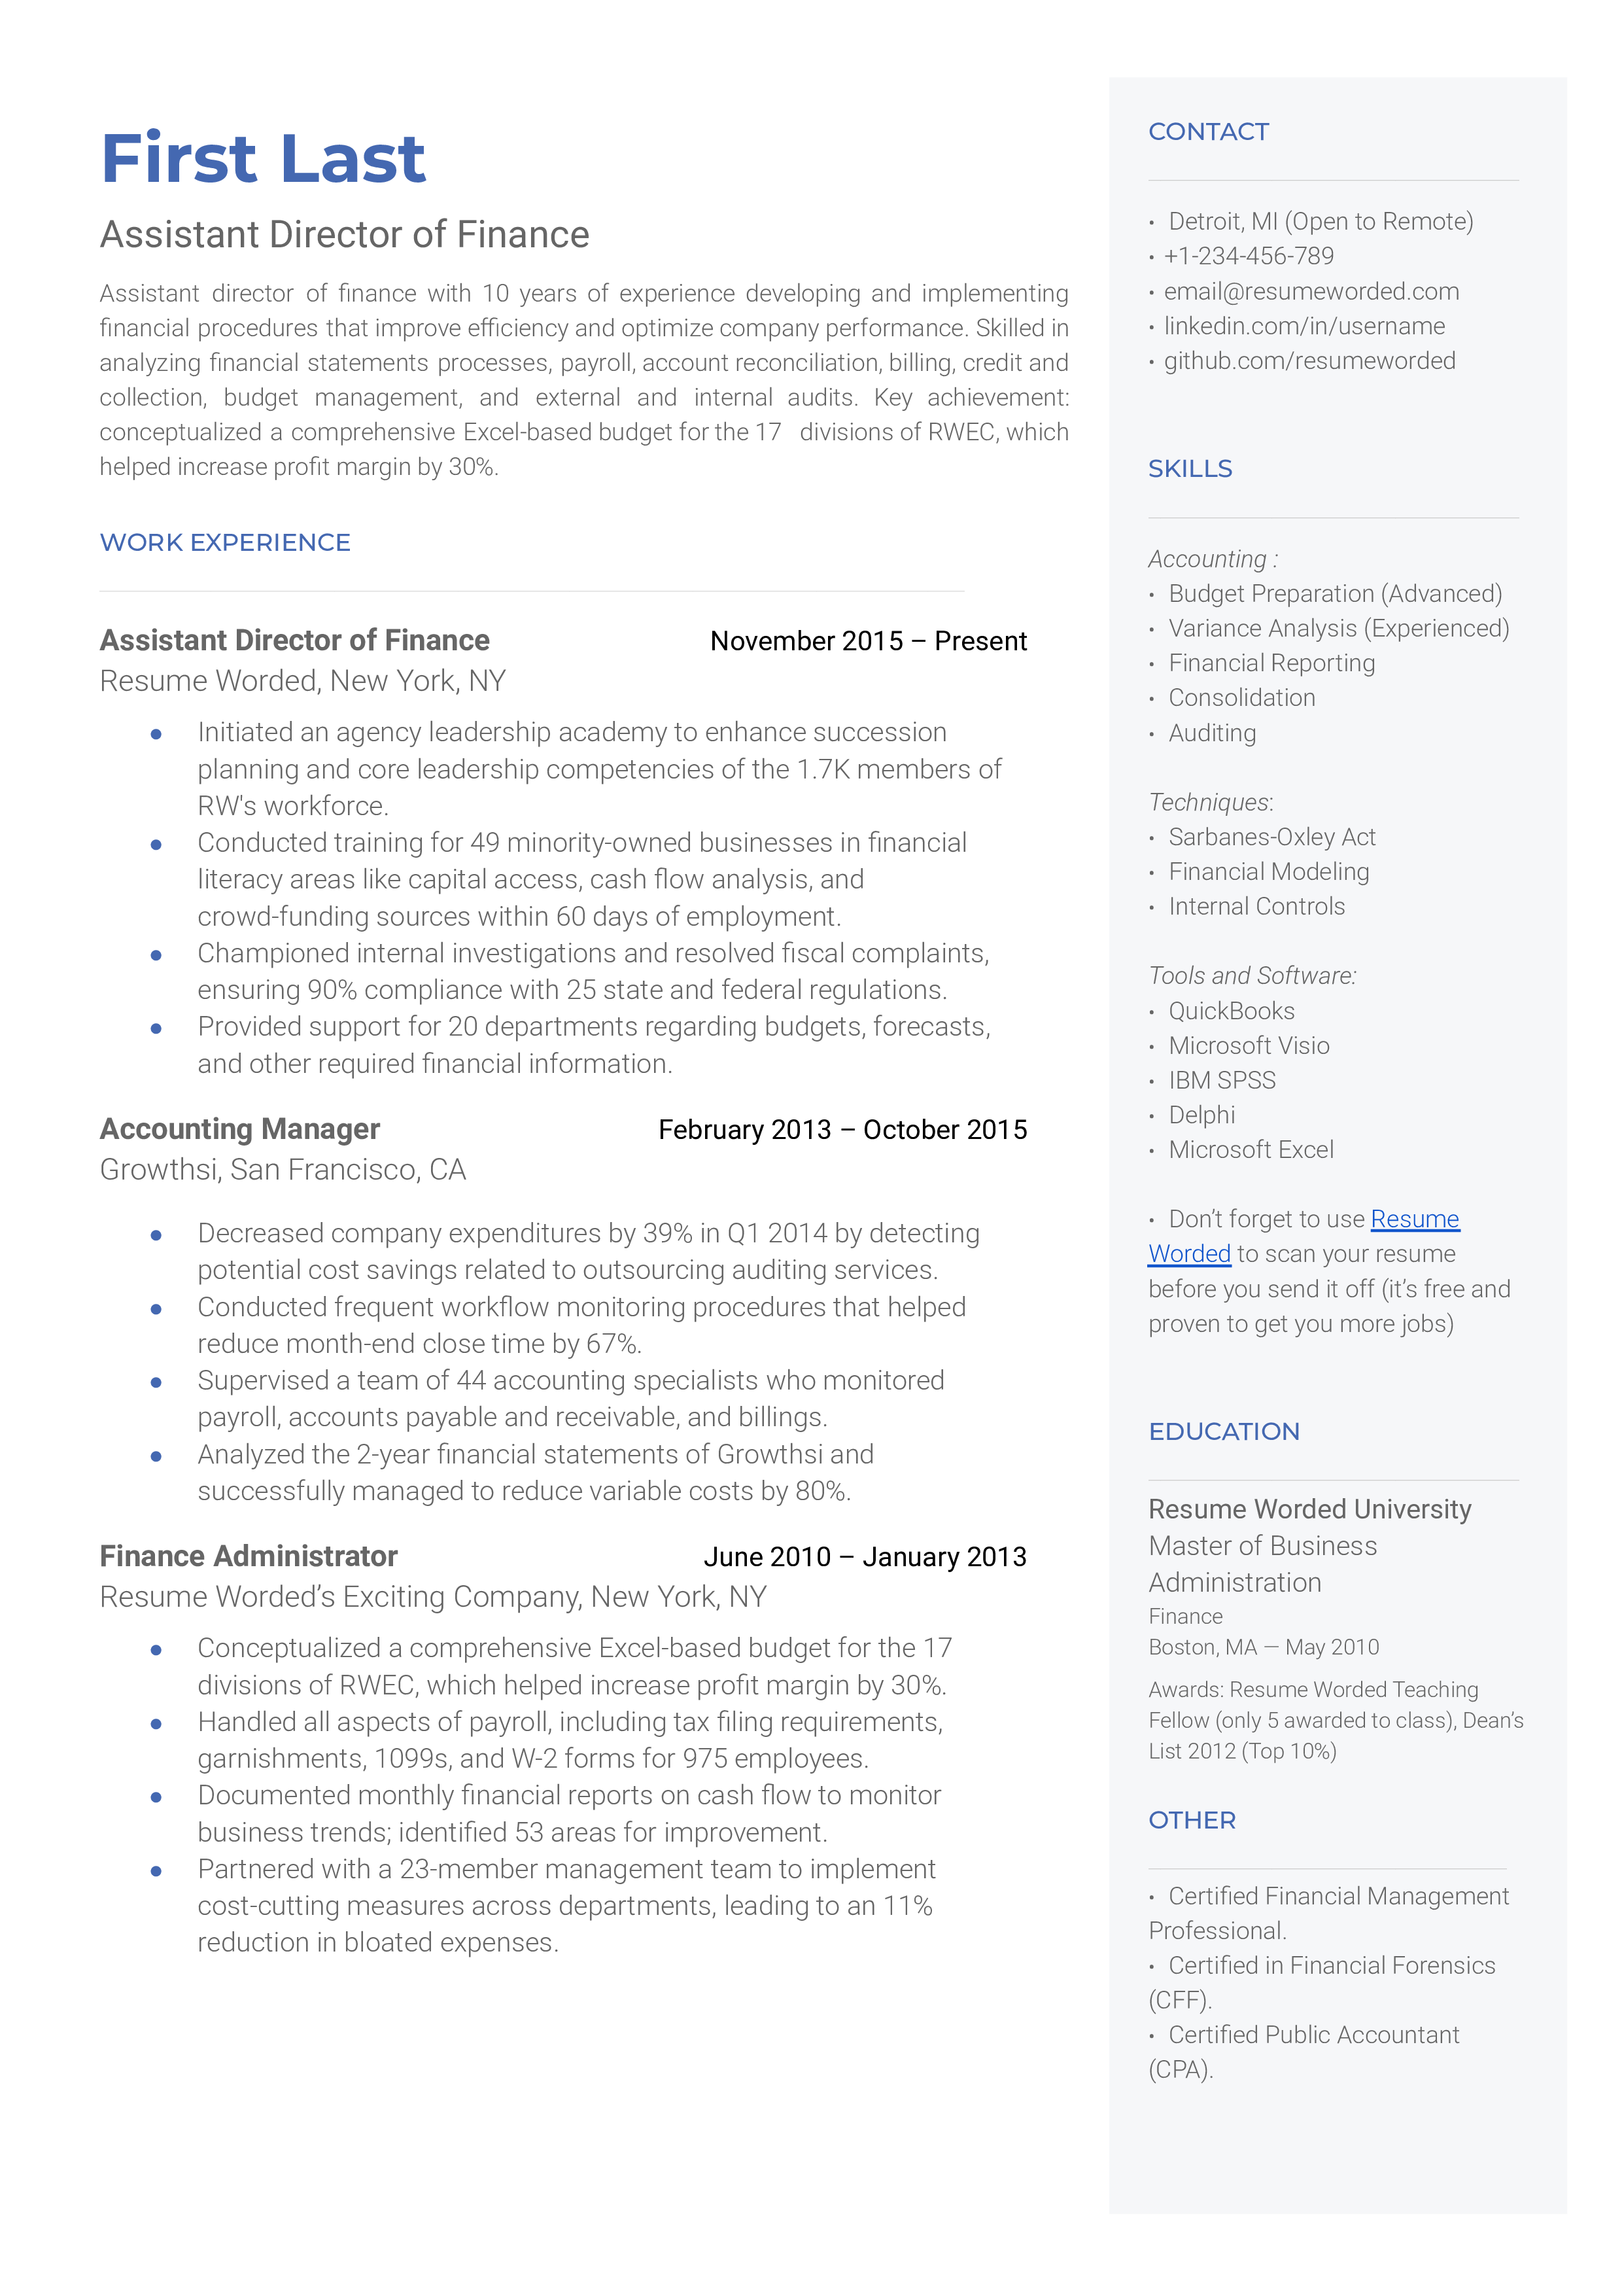 An assistant director of finance resume sample that highlights the applicant’s certifications and leadership experience.